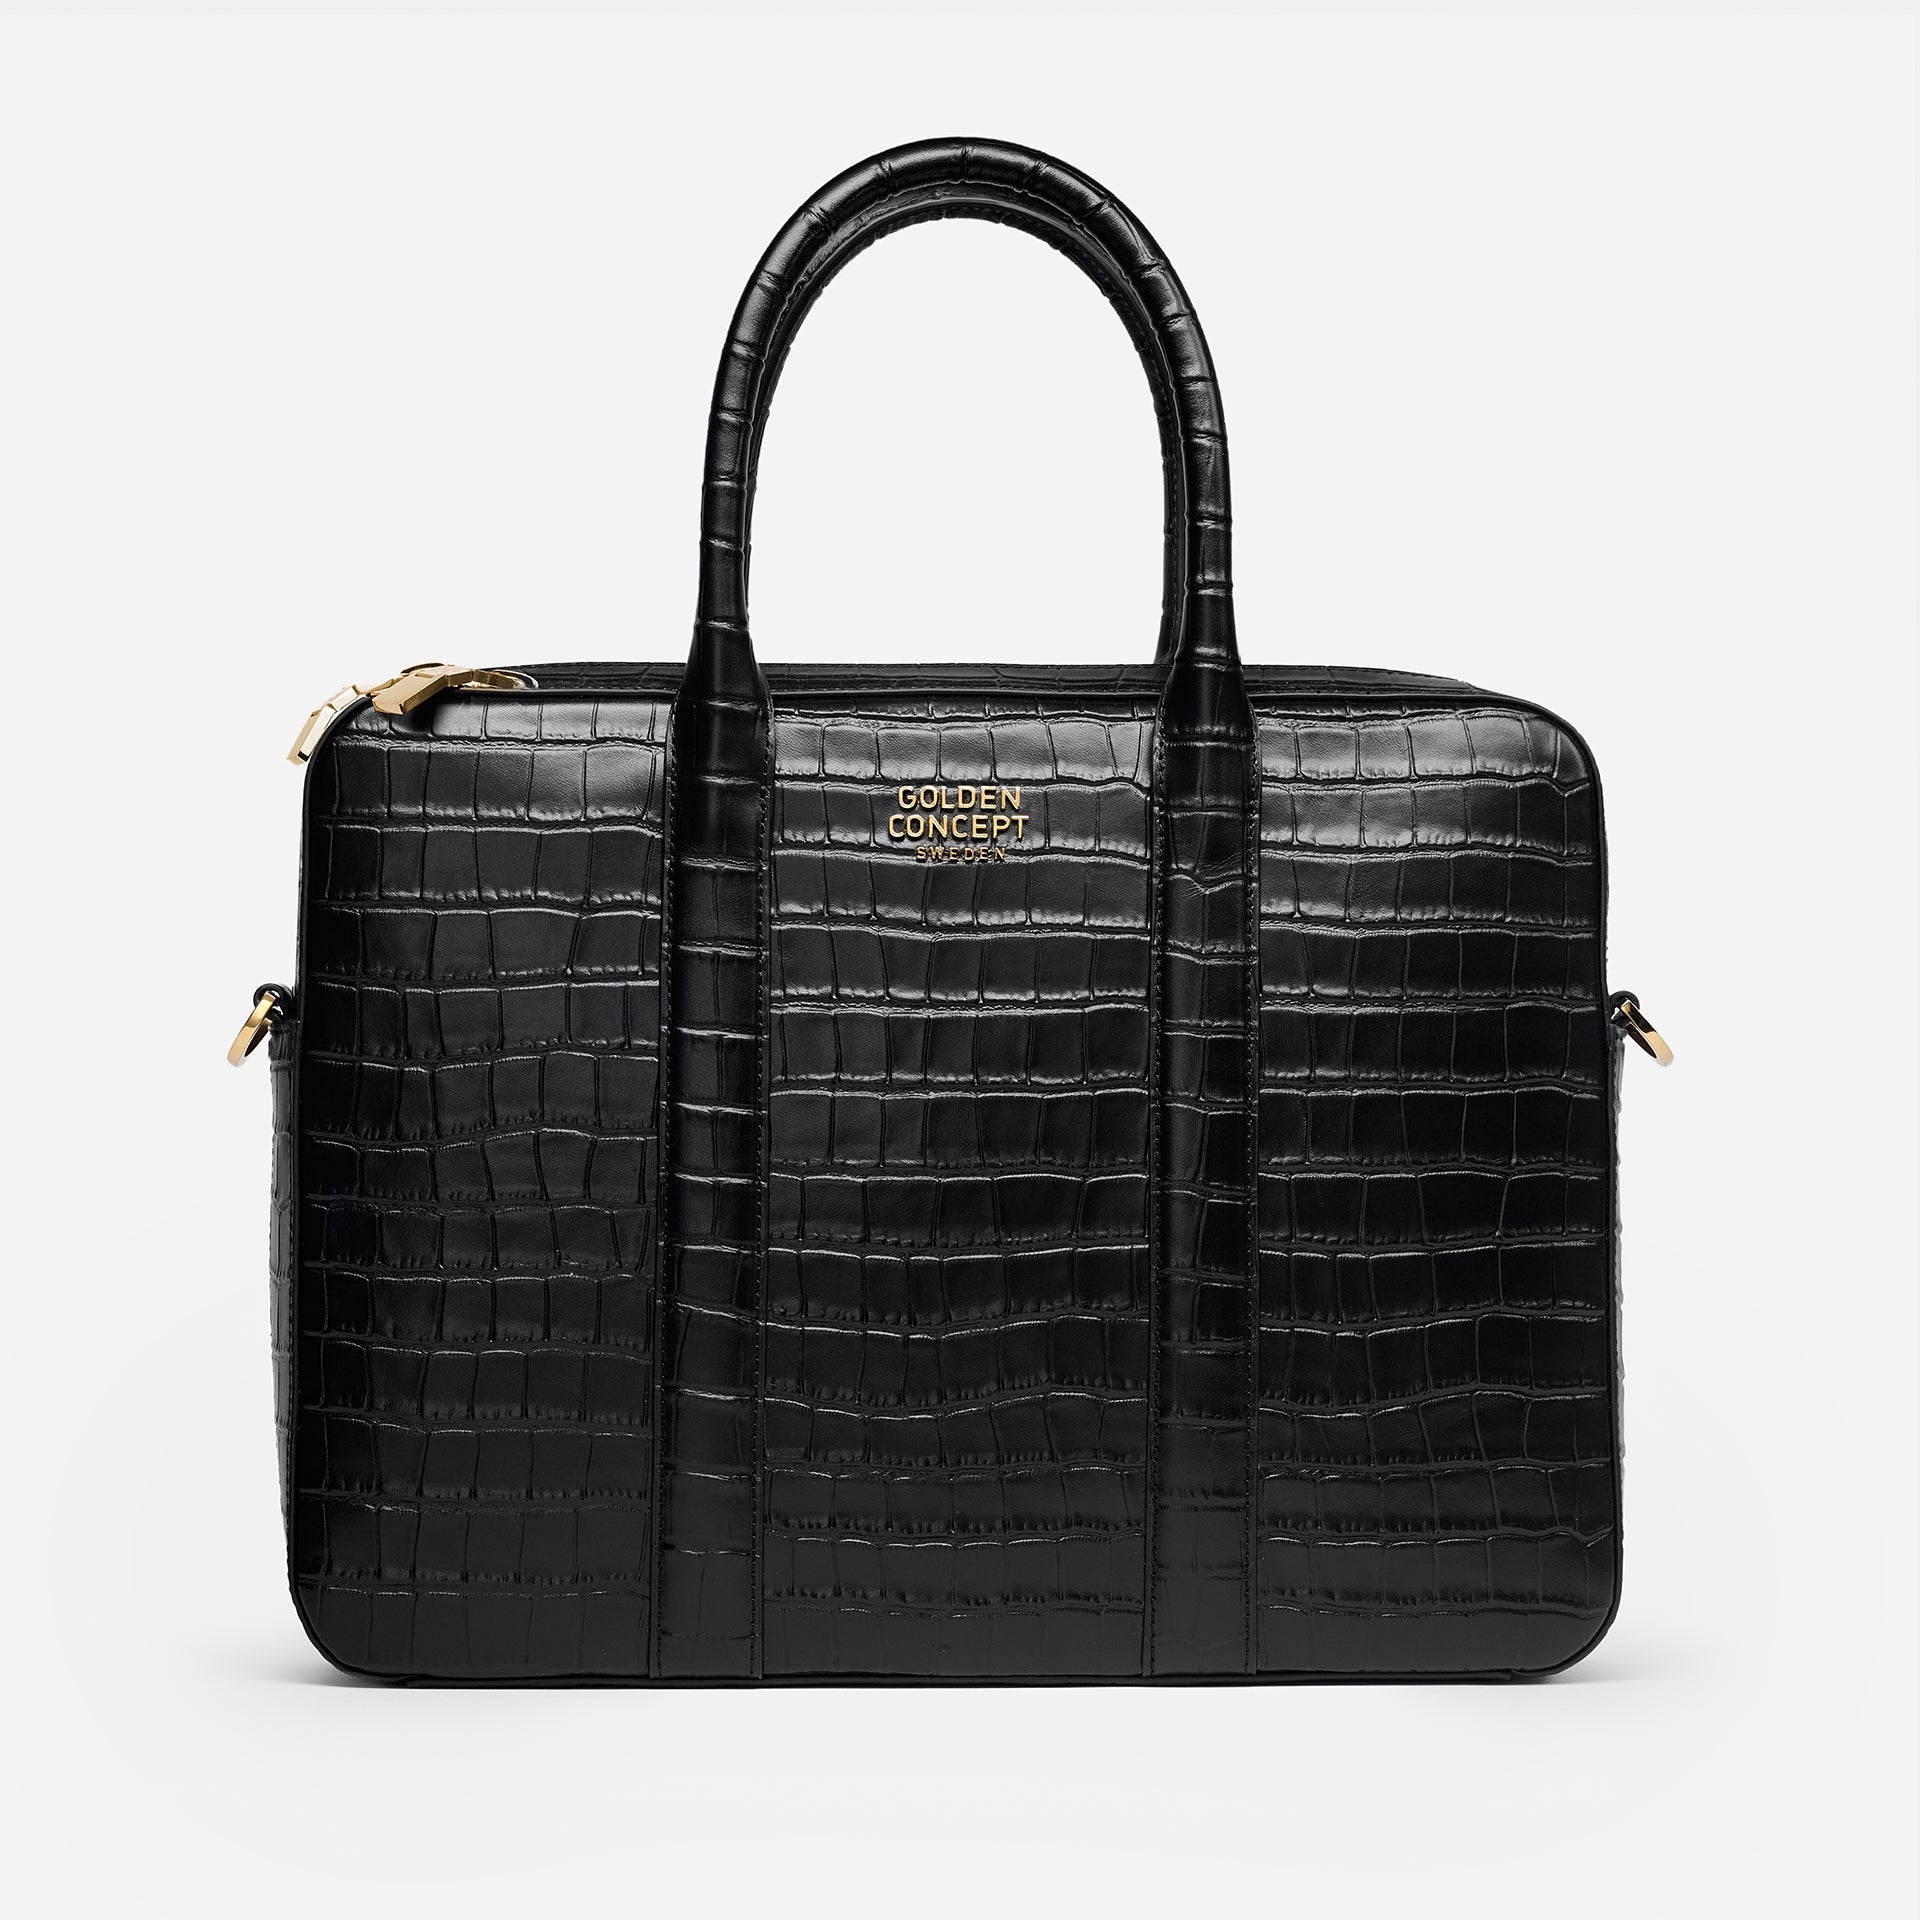 Golden Concept - Leather Bags - Briefcase (Croco Embossed)